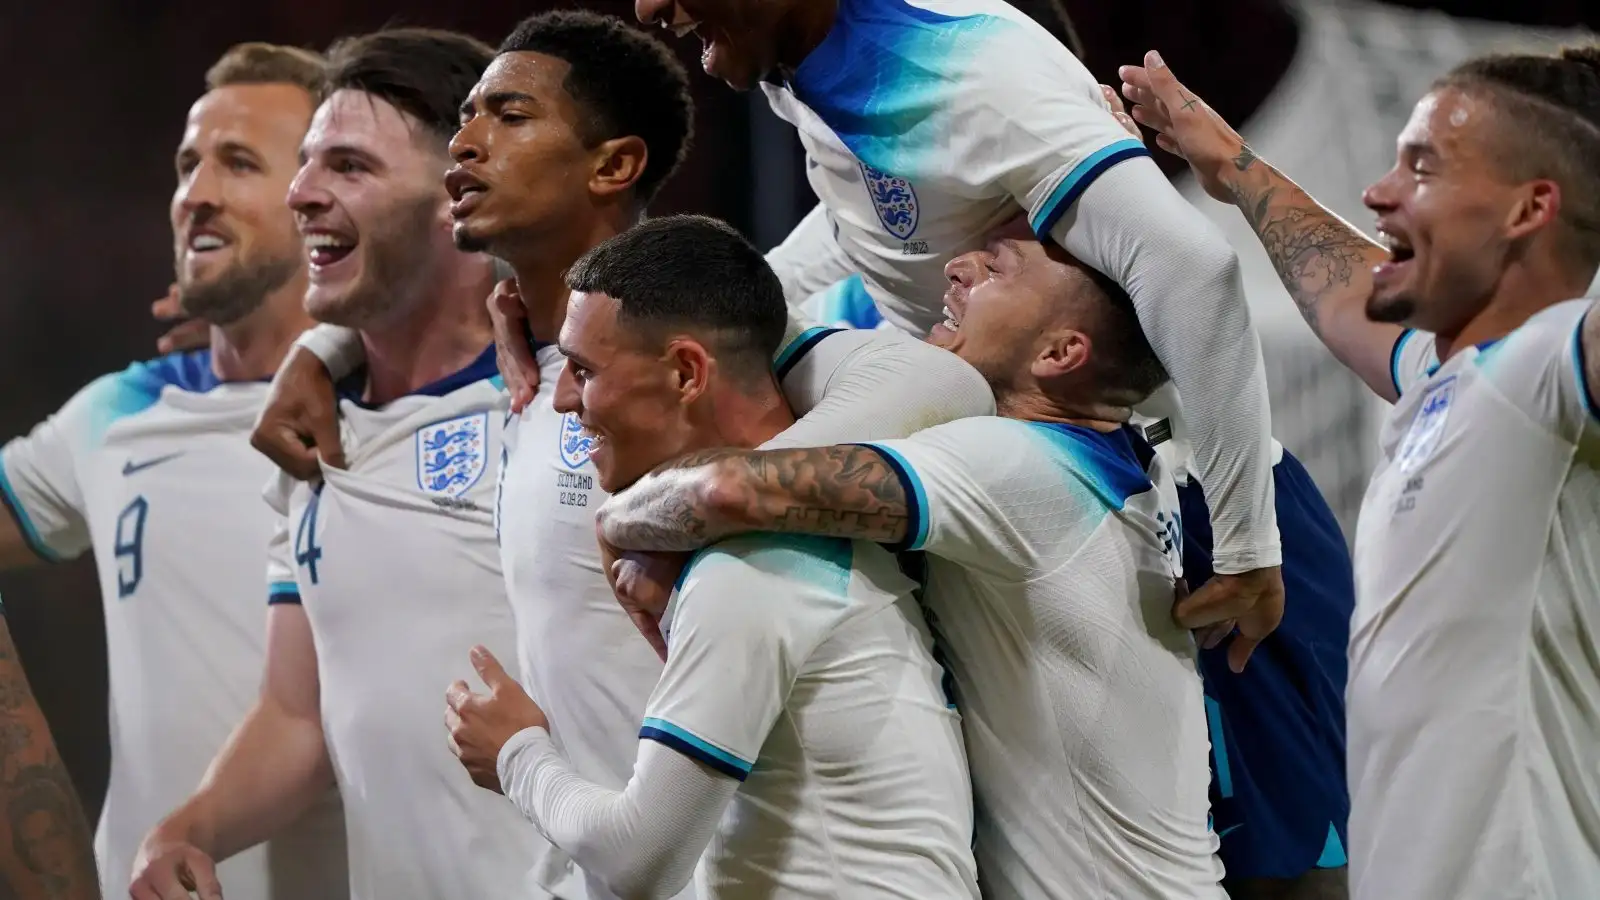 Jude Bellingham celebrates his goal with his England teammates.